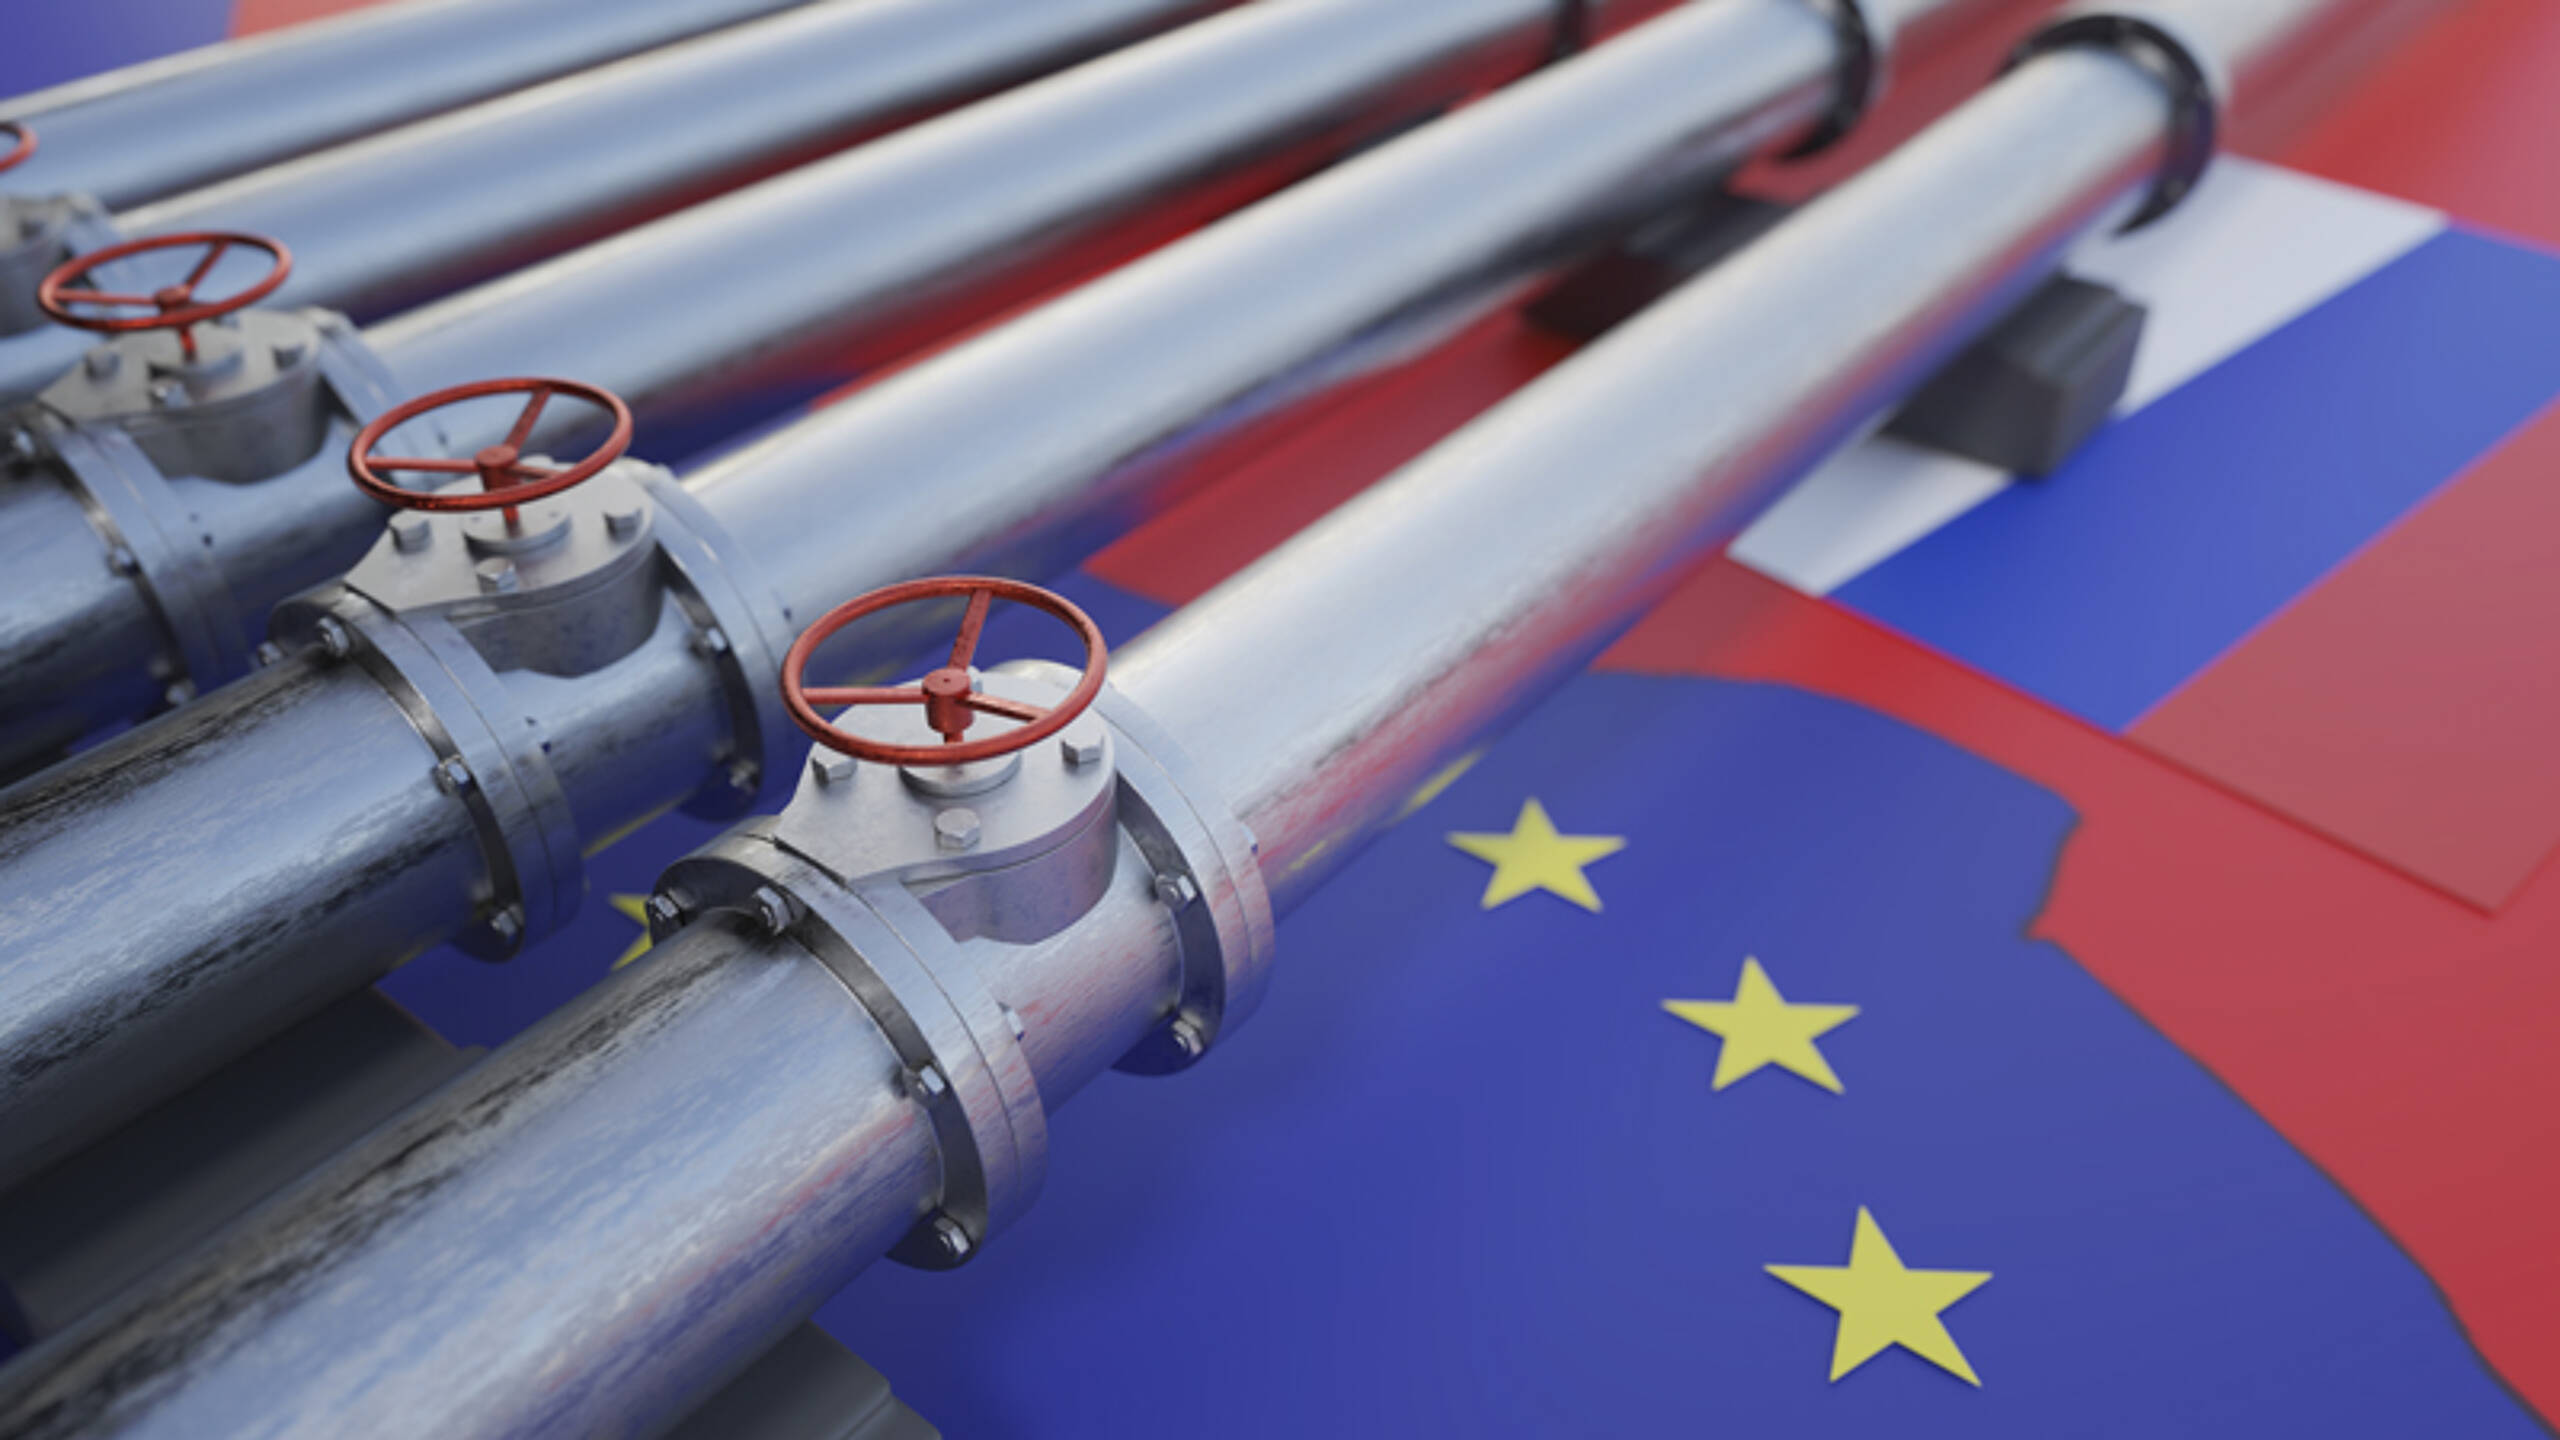 EU-27 approves gas demand reduction plan after power struggle with Brussels